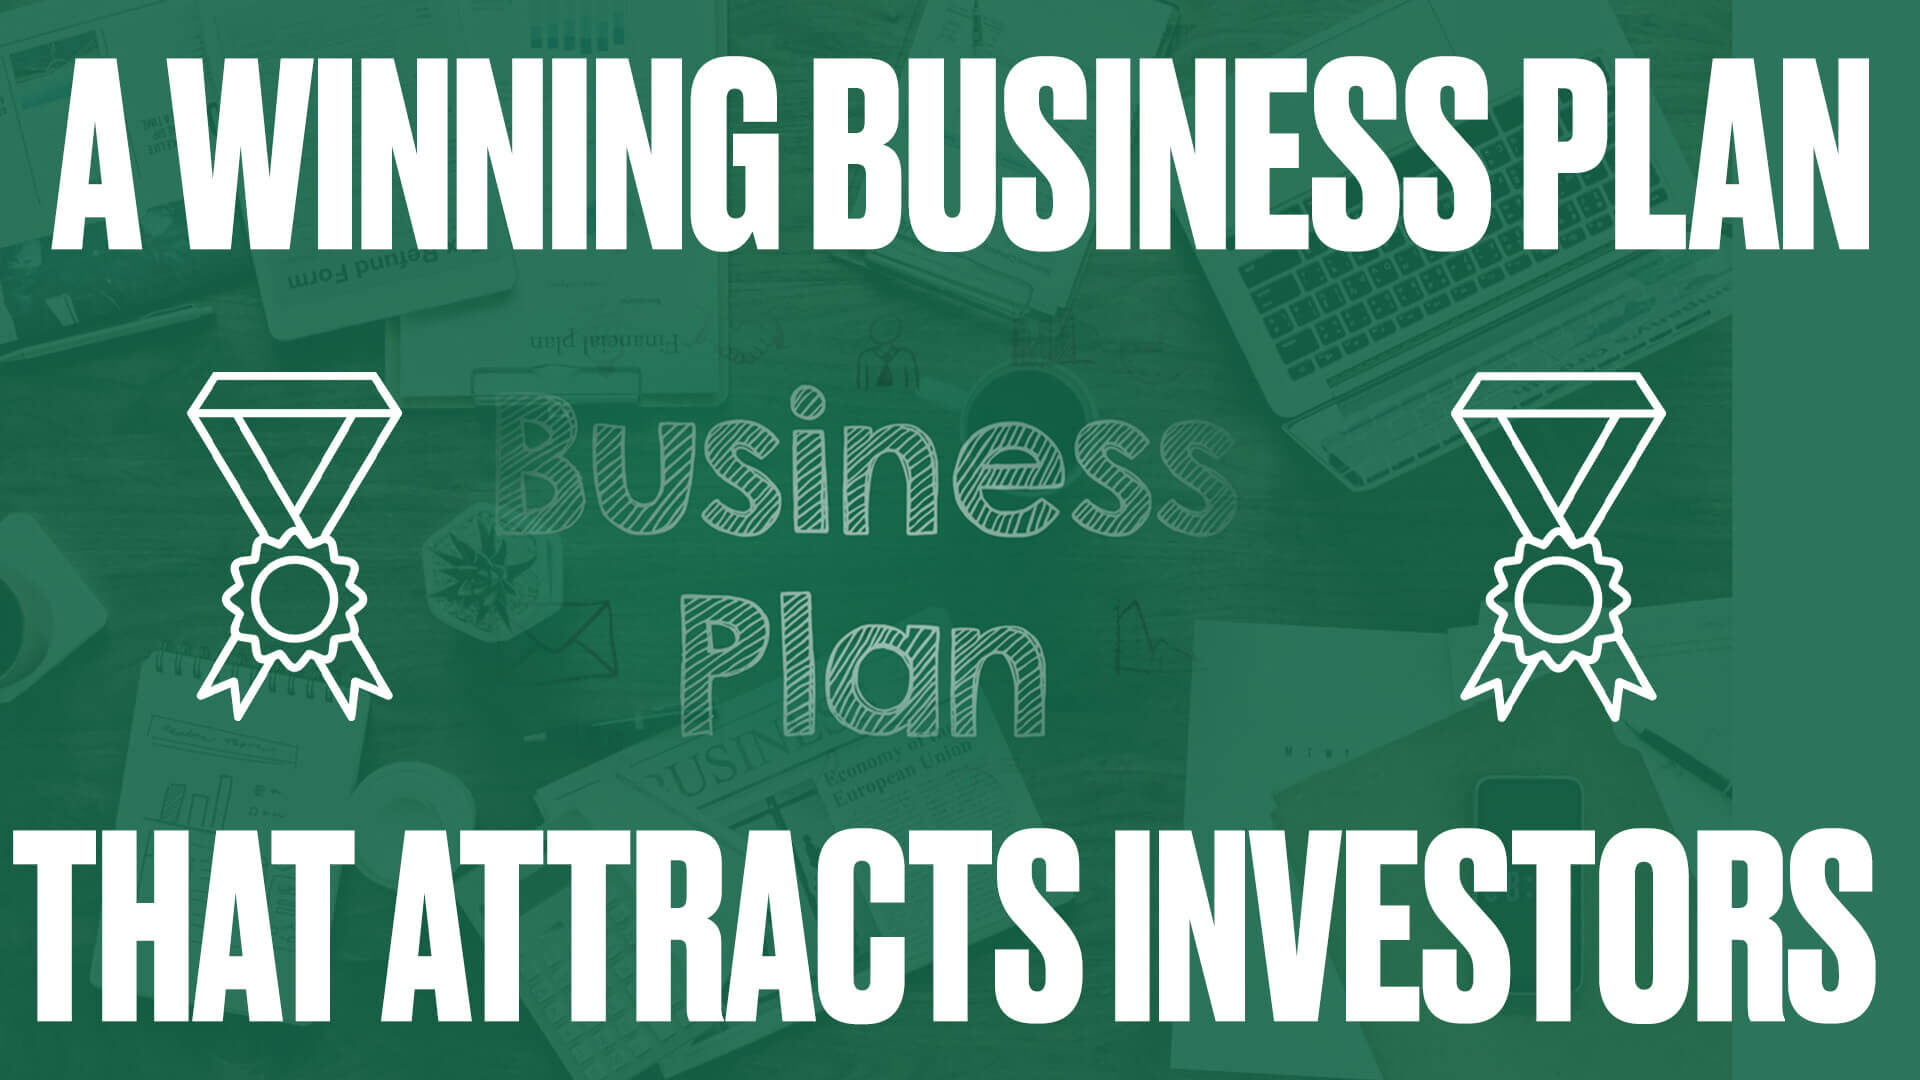 How to Write a Winning Business Plan That Attracts Investors